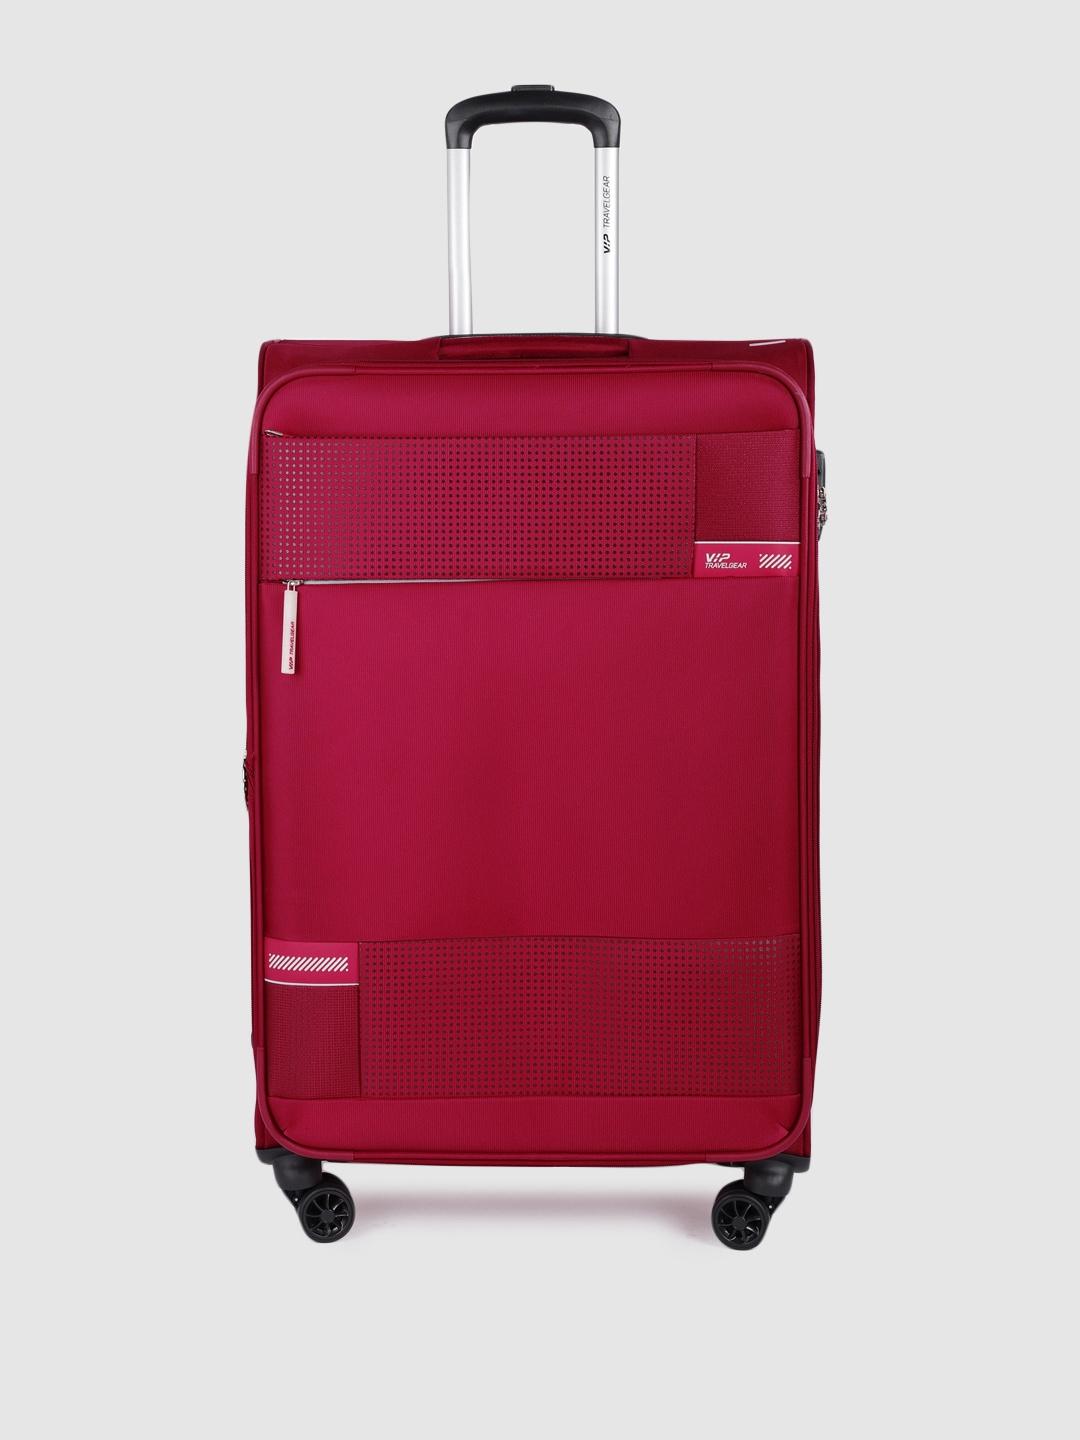 vip zion nxt soft large trolley suitcase